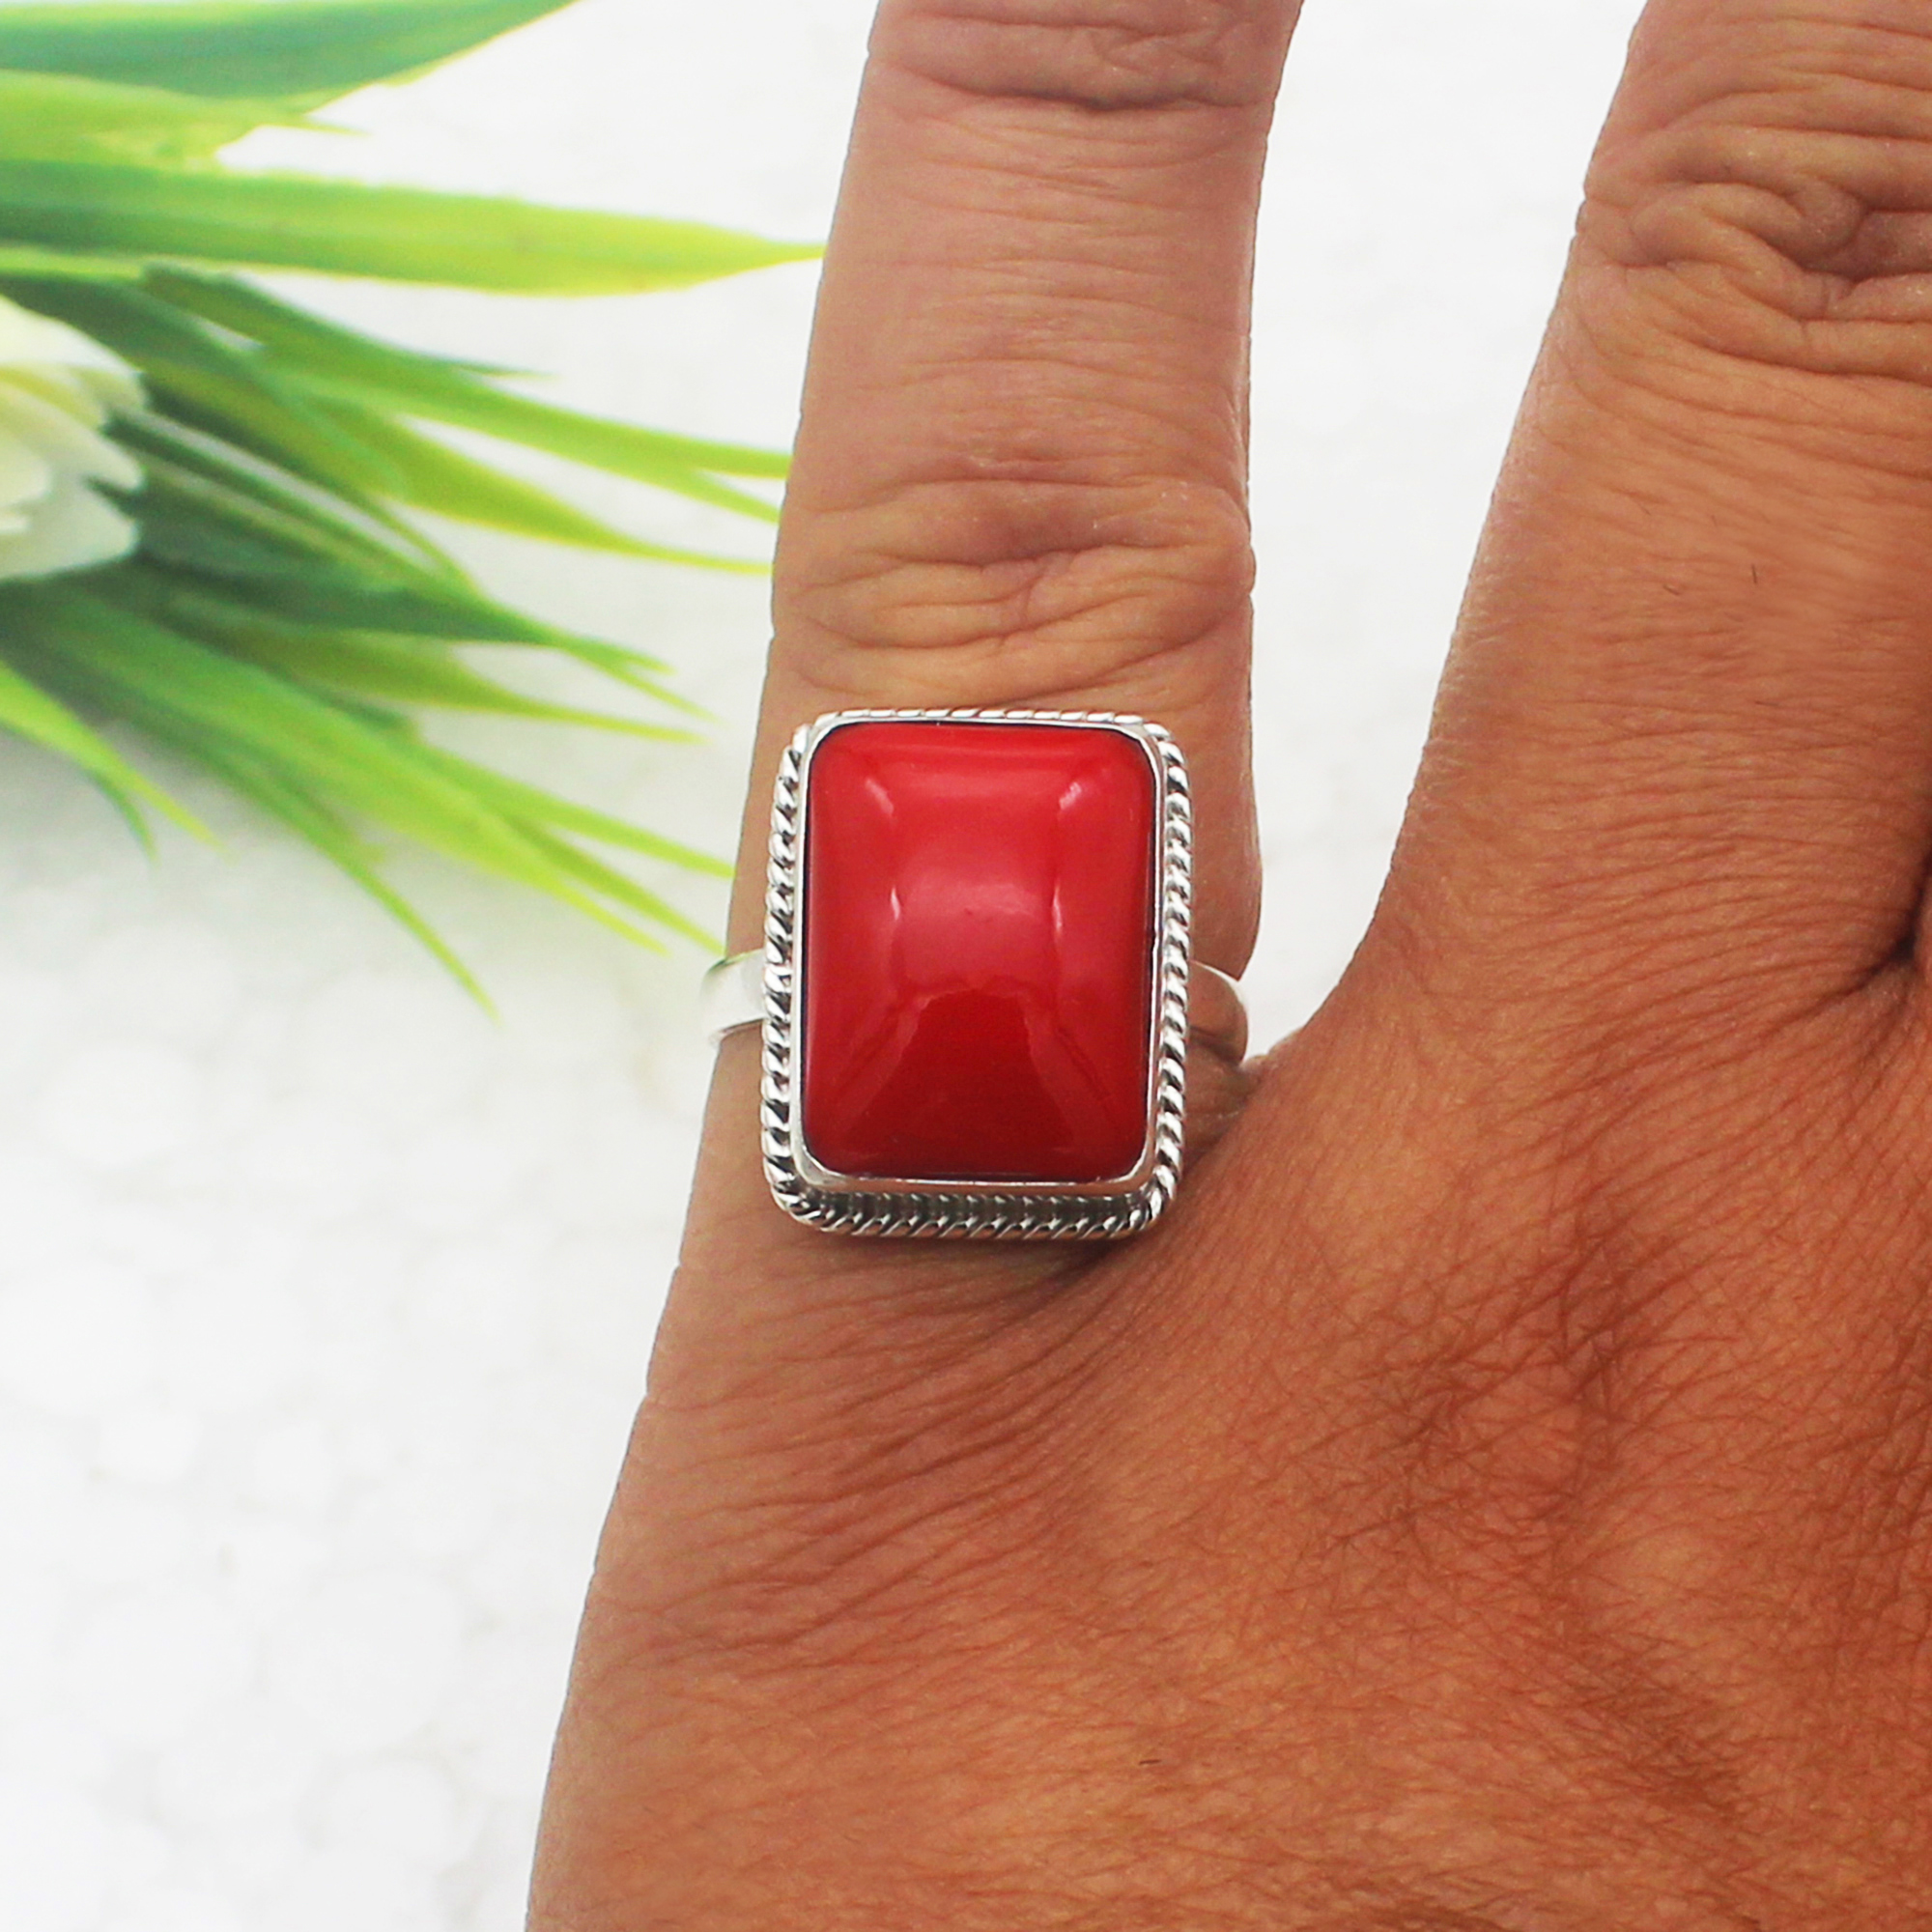 Men's Handmade Crushed Coral Inlay Ring | Burton's – Burton's Gems and Opals